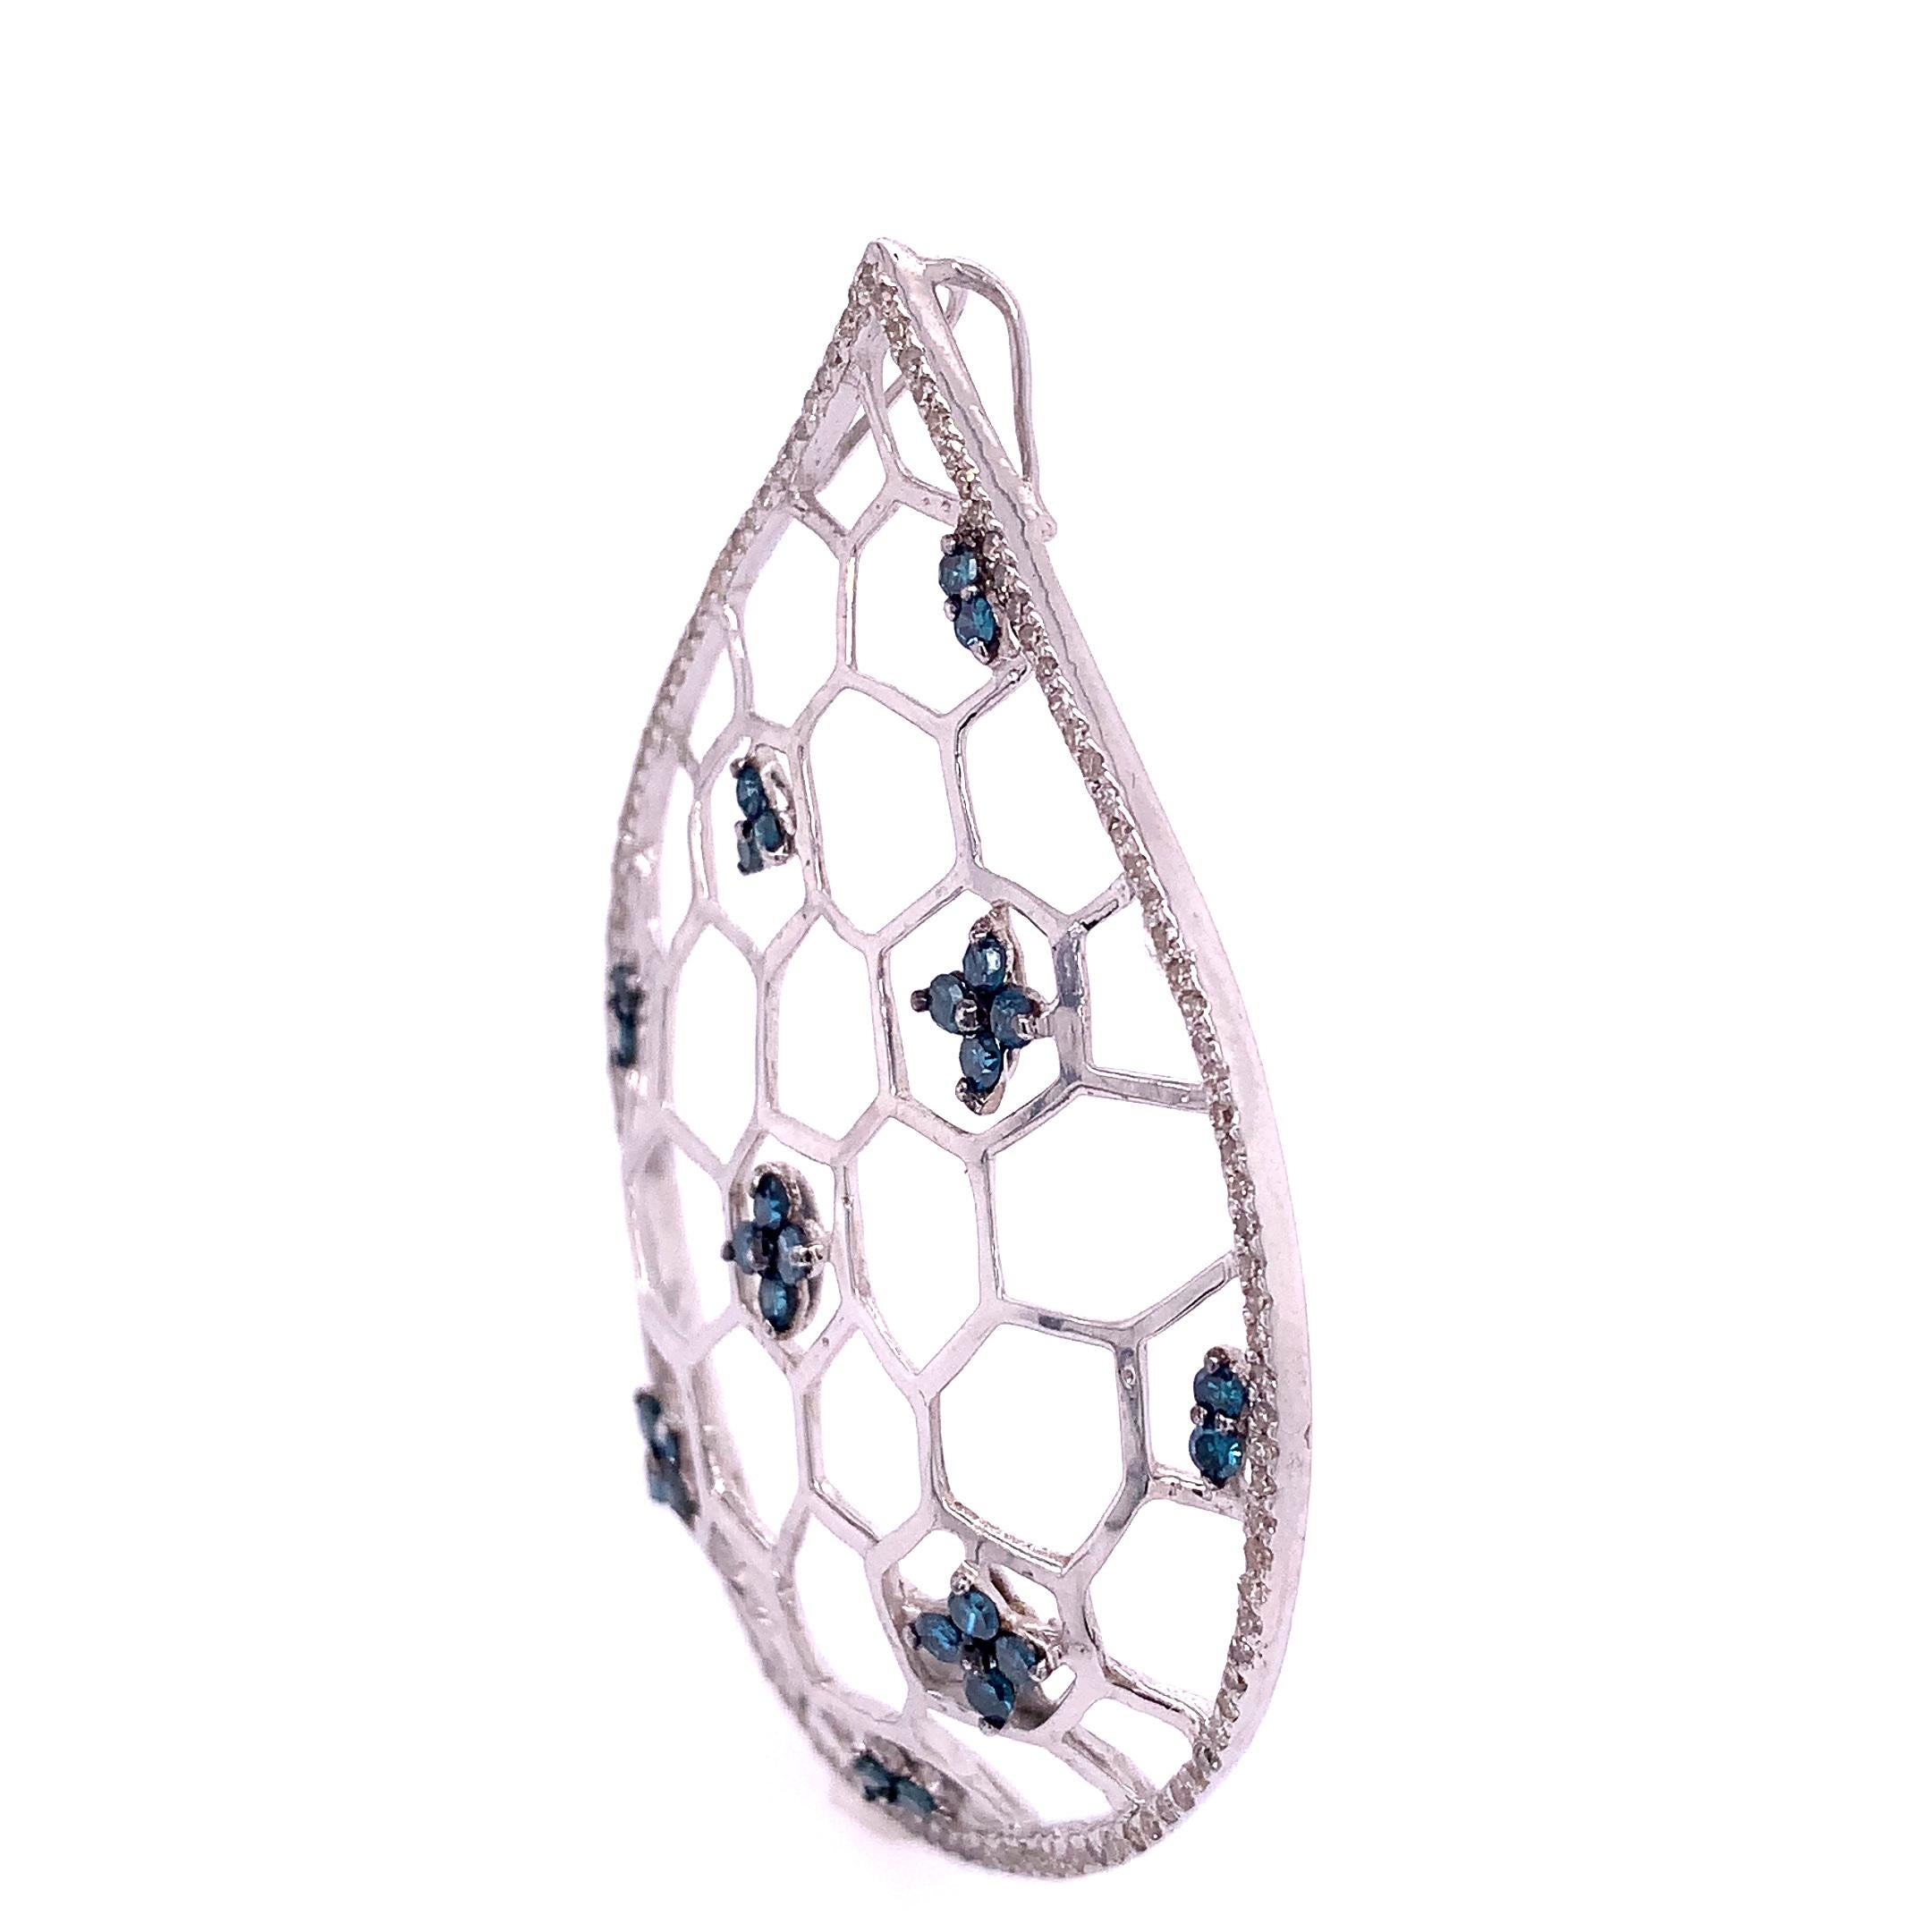 Life in color collection

Blue diamonds set in silver honey comb pattern with white diamonds pave.

Blue Diamond : 0.56ct total weight.
Diamond : 0.45ct total weight.